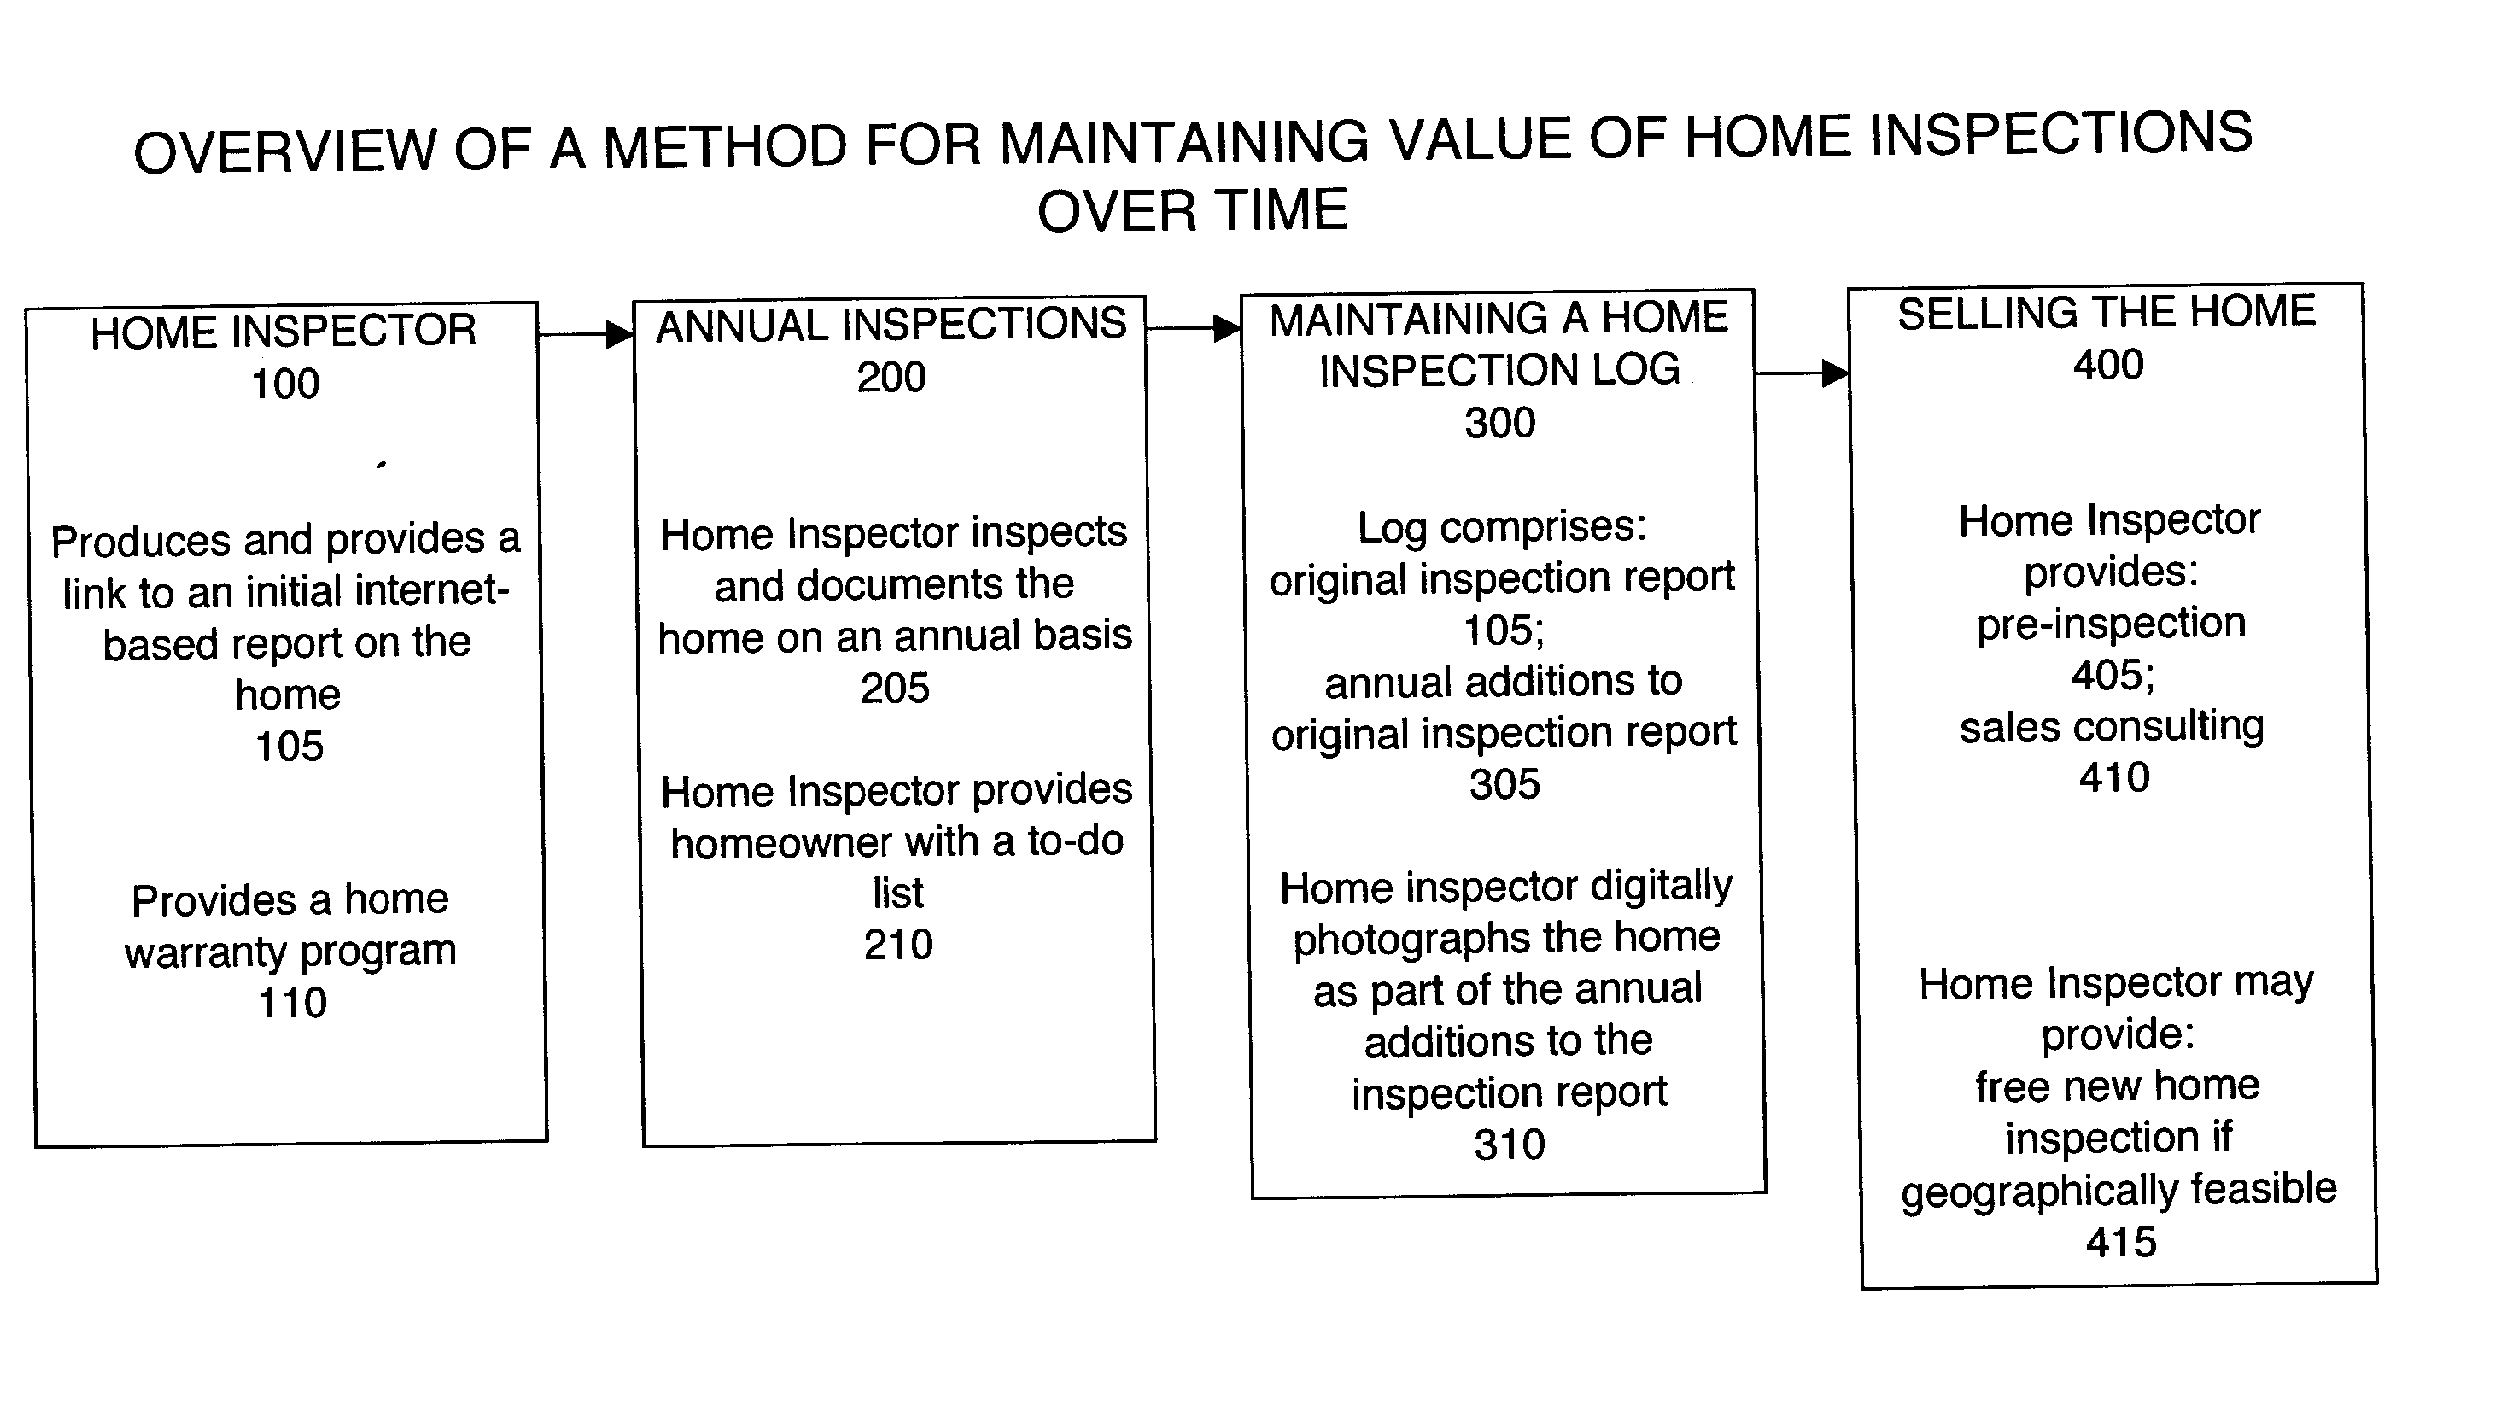 Method for maintaining the value of home inspections over time